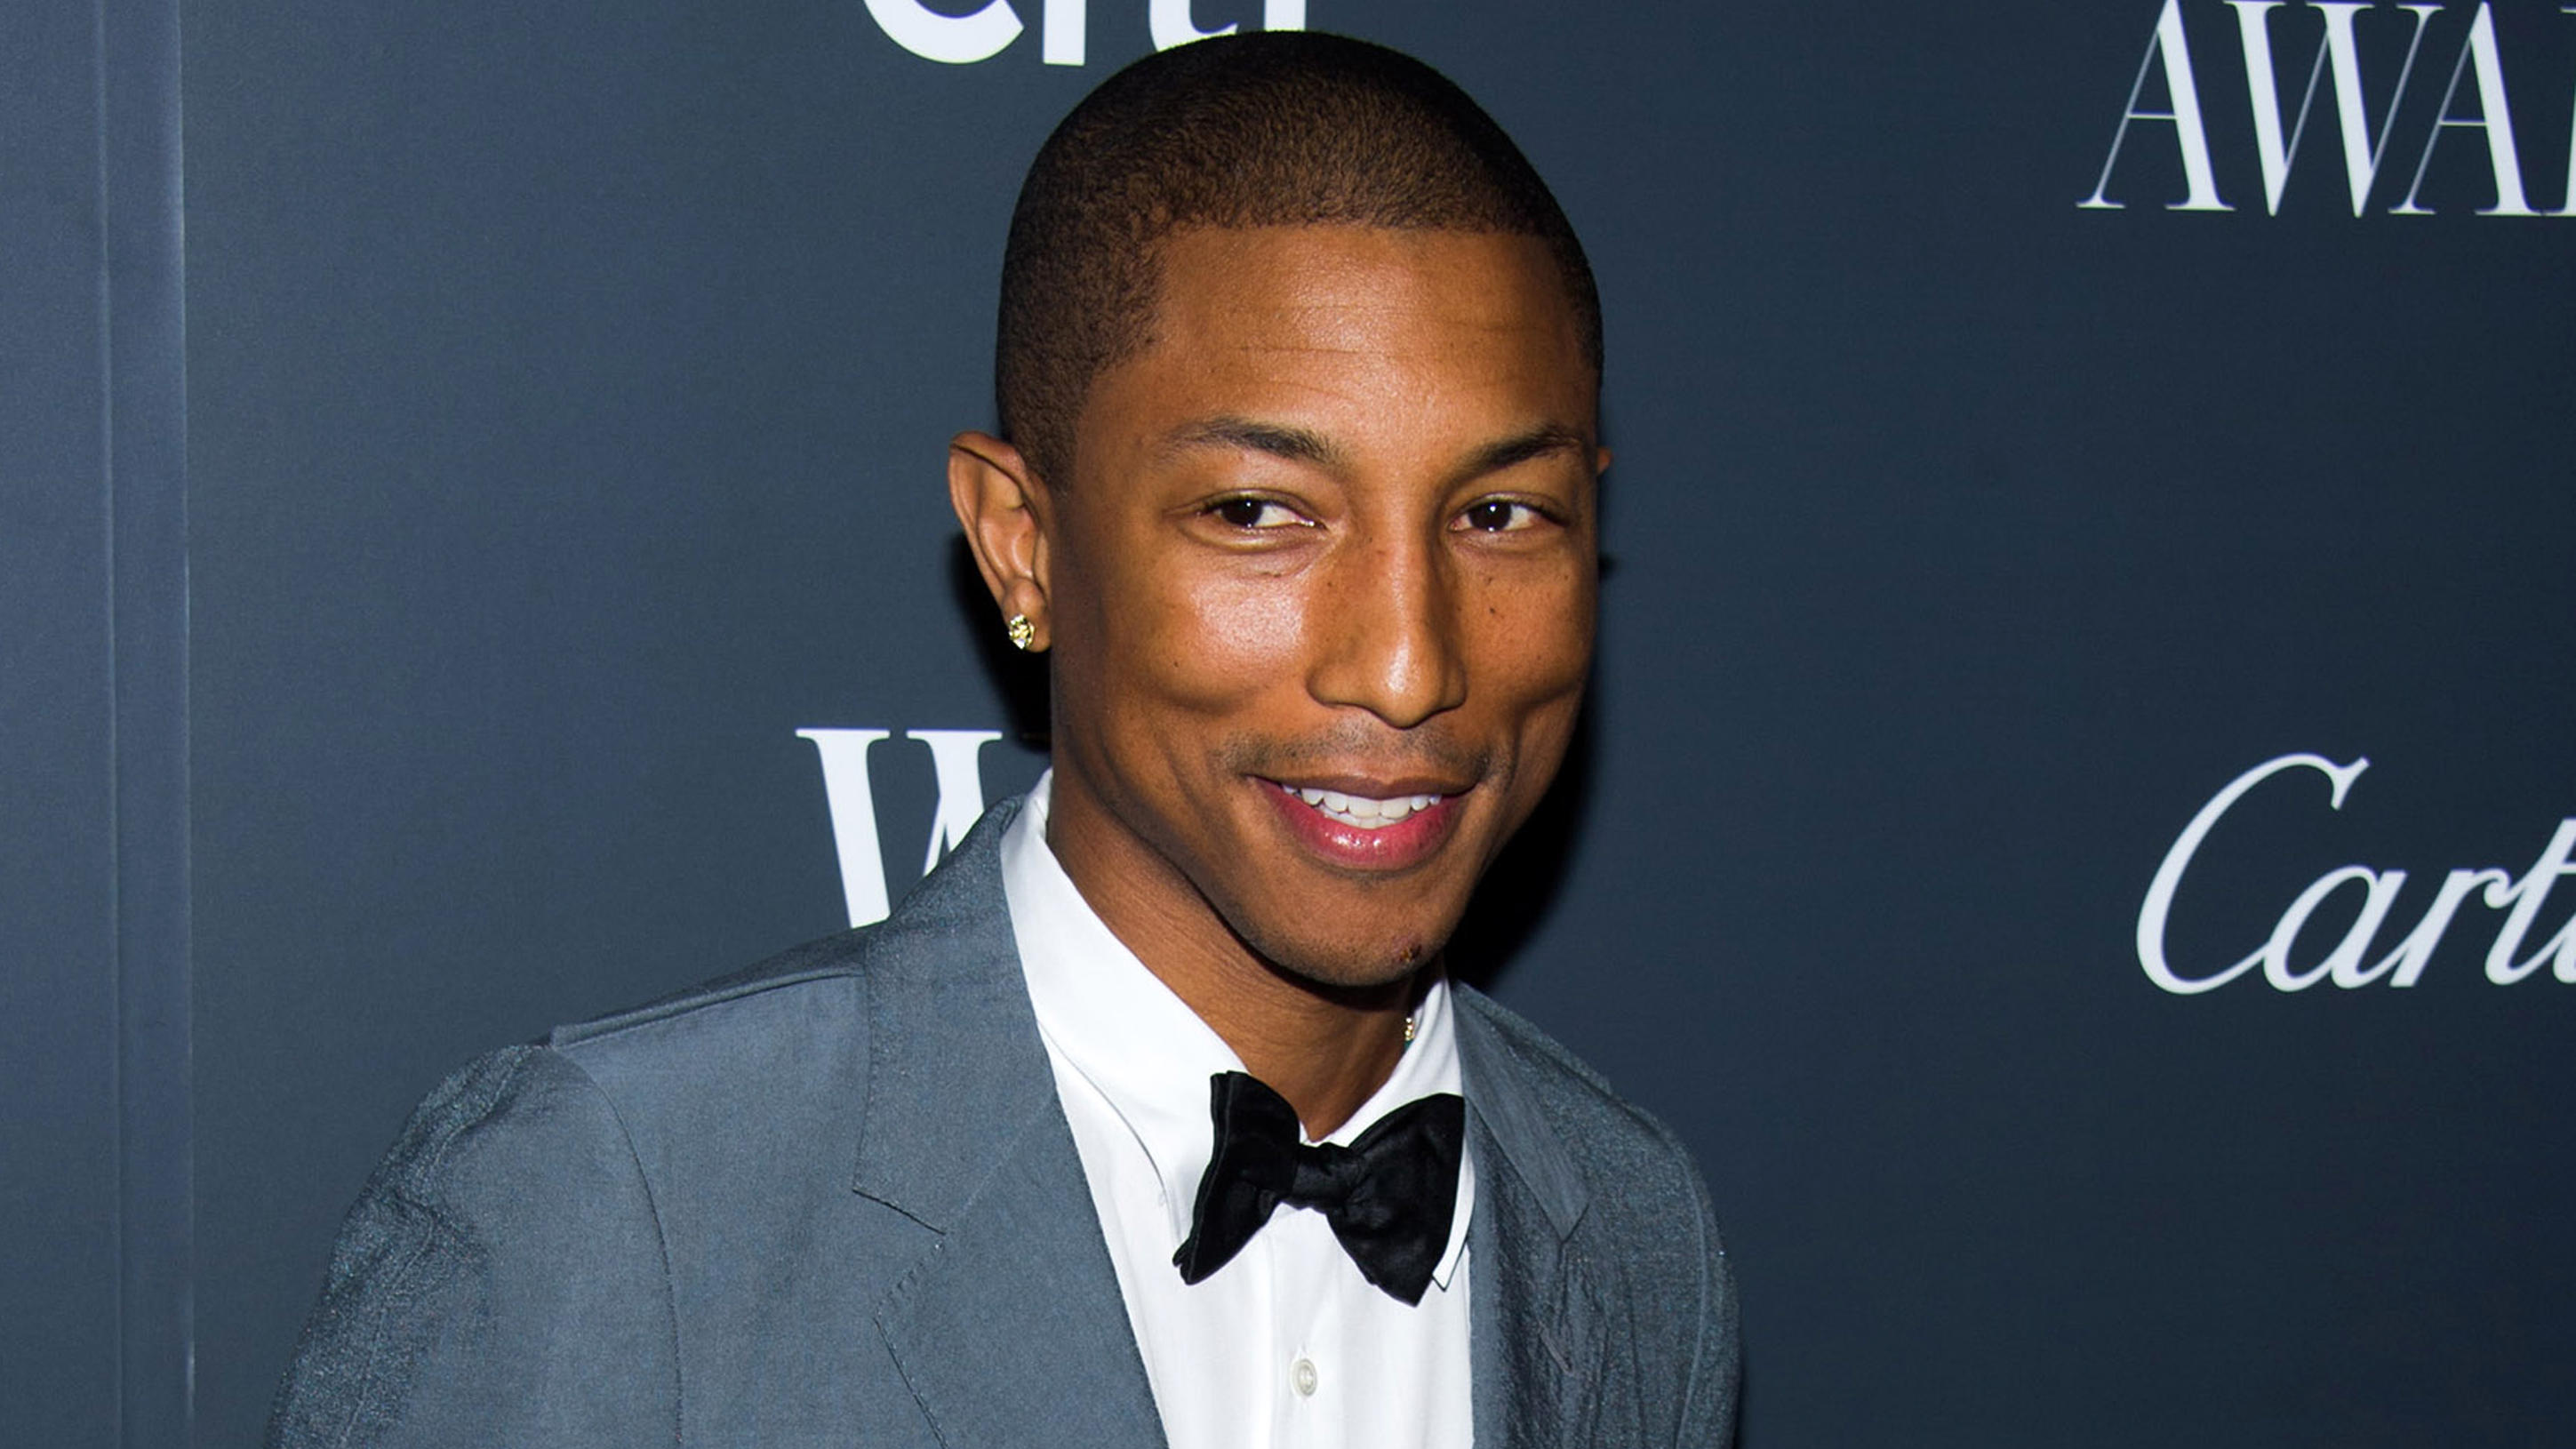 Pharrell Williams, Wallpapers pictures hd, Hd wallpapers for your, Desktop mobile tablet, 2900x1630 HD Desktop